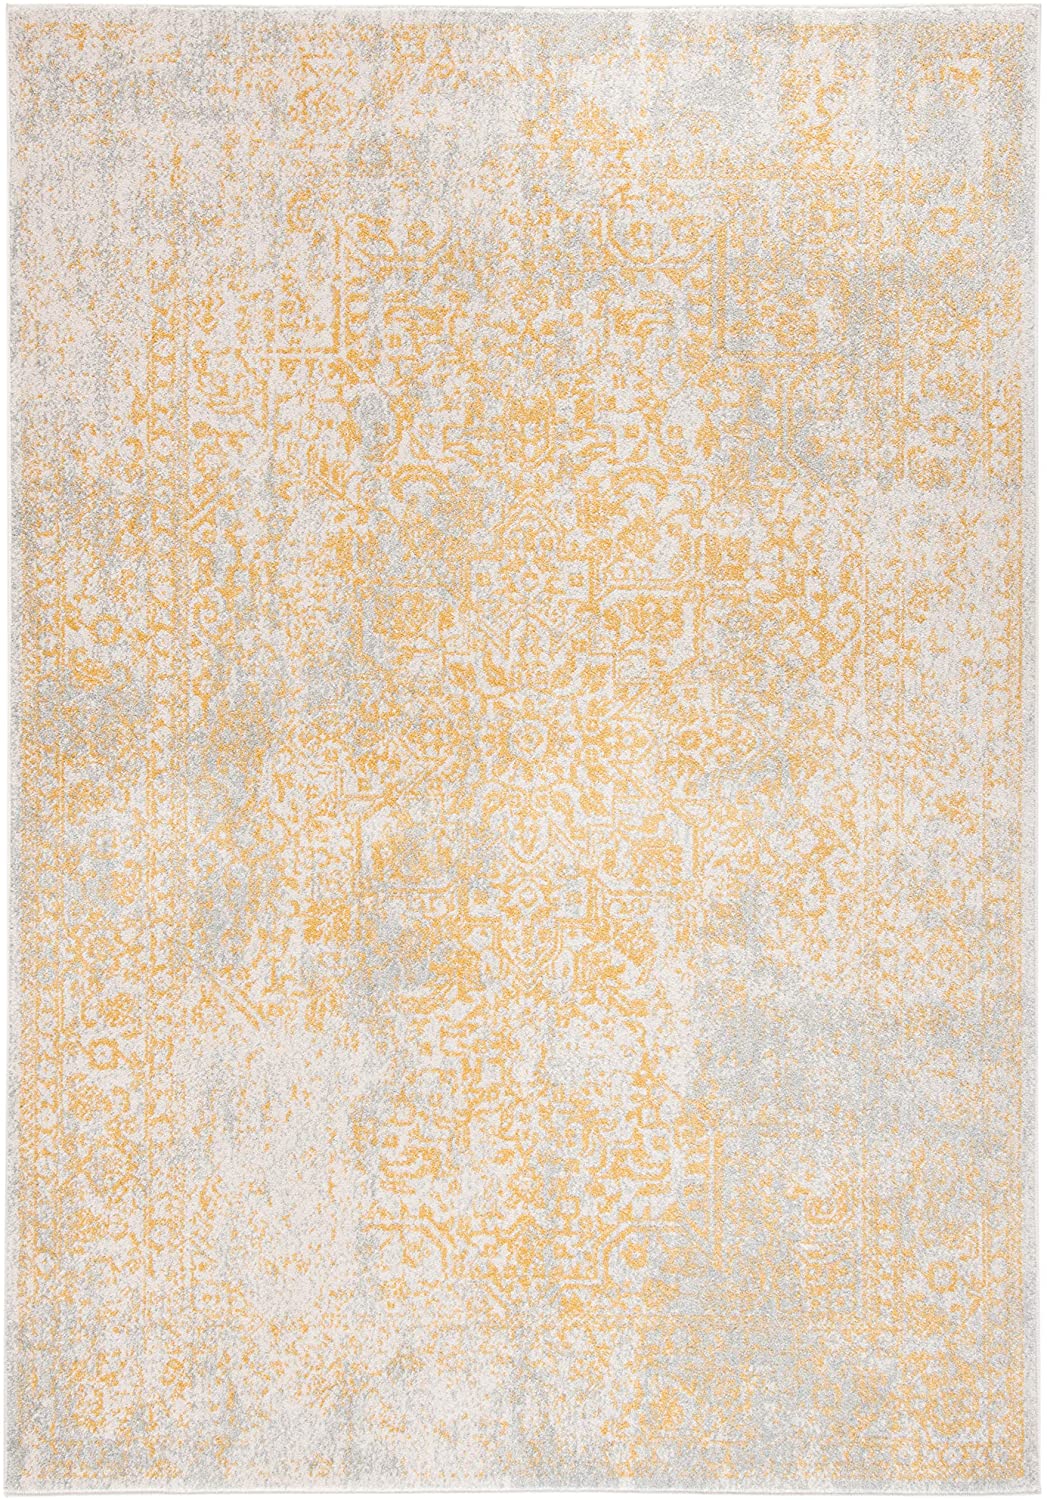 Oriental Shabby Chic Vintage Distressed Area Rug, Ivory/Gold